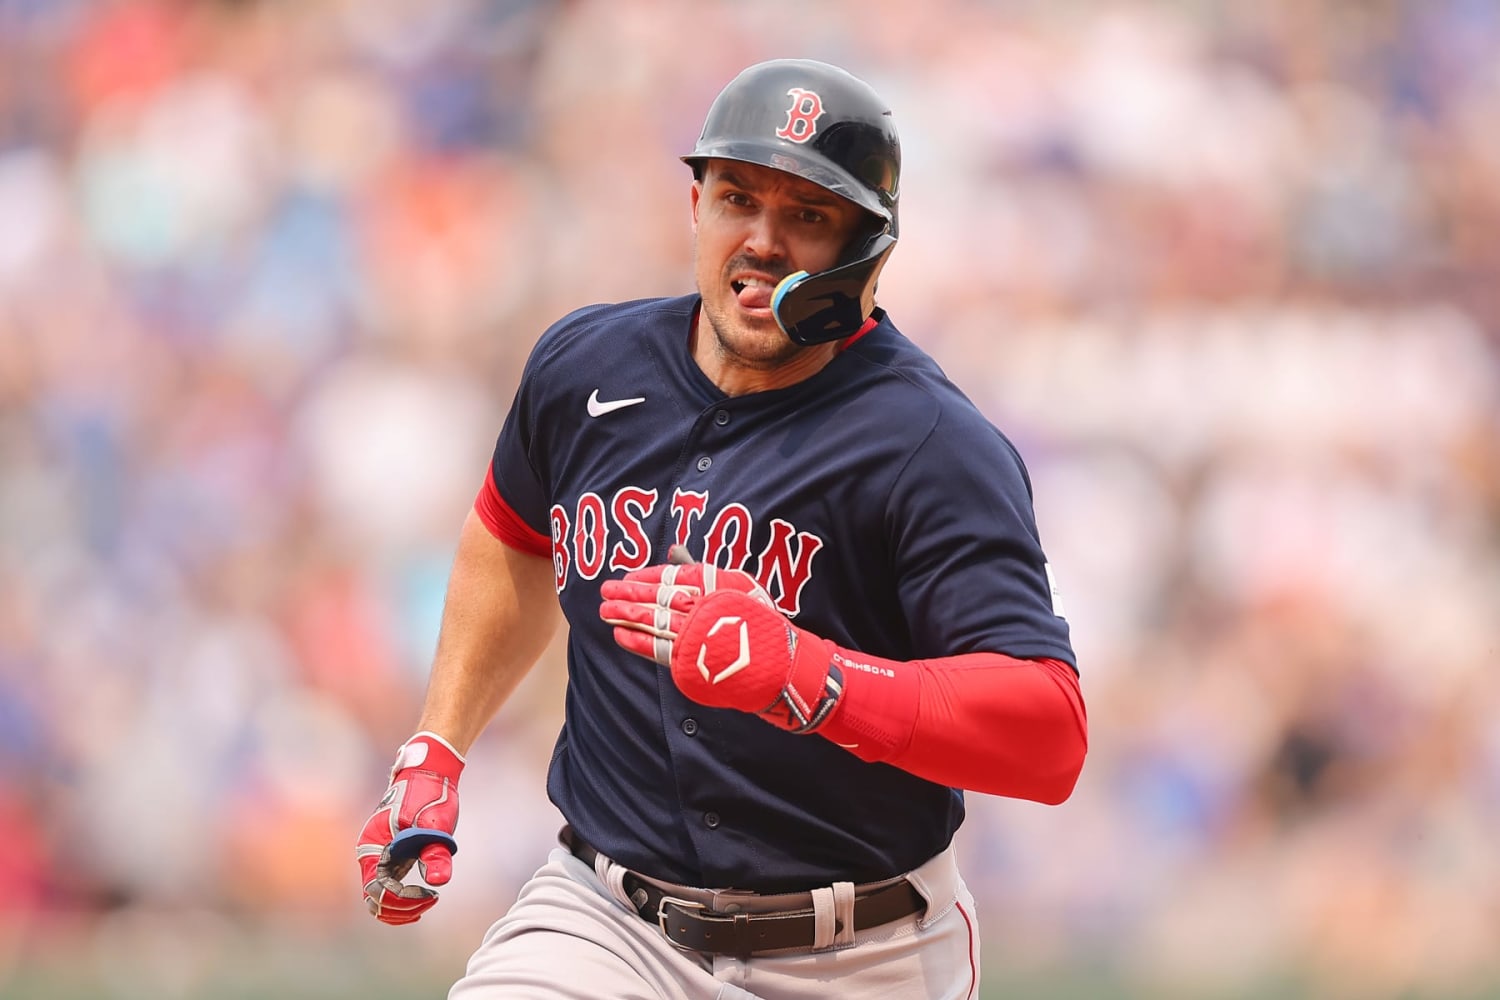 Red Sox slugger Adam Duvall going on IL with fractured wrist